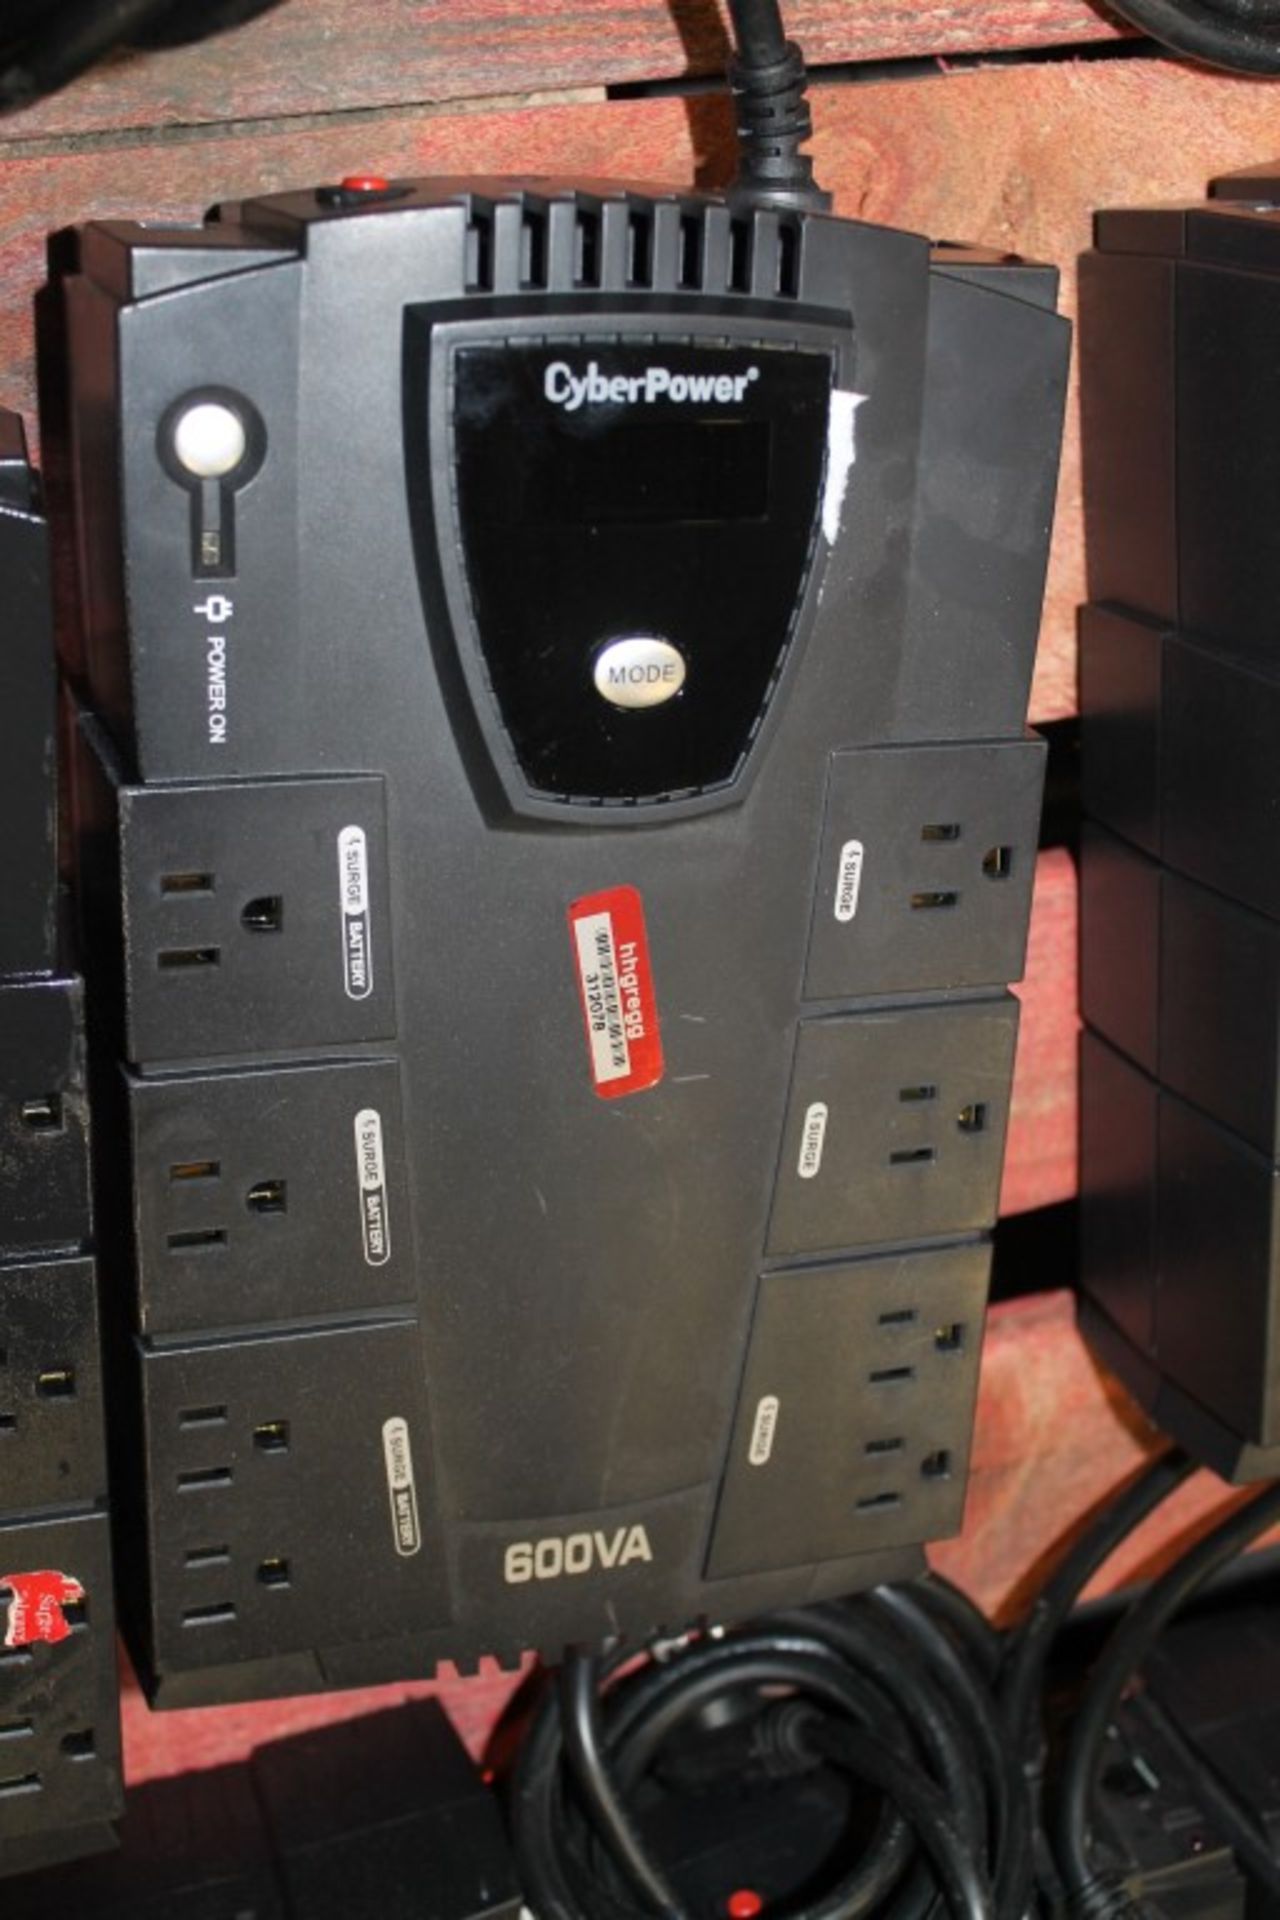 CYBERPOWER 600VA 8 OUTLETS UPS